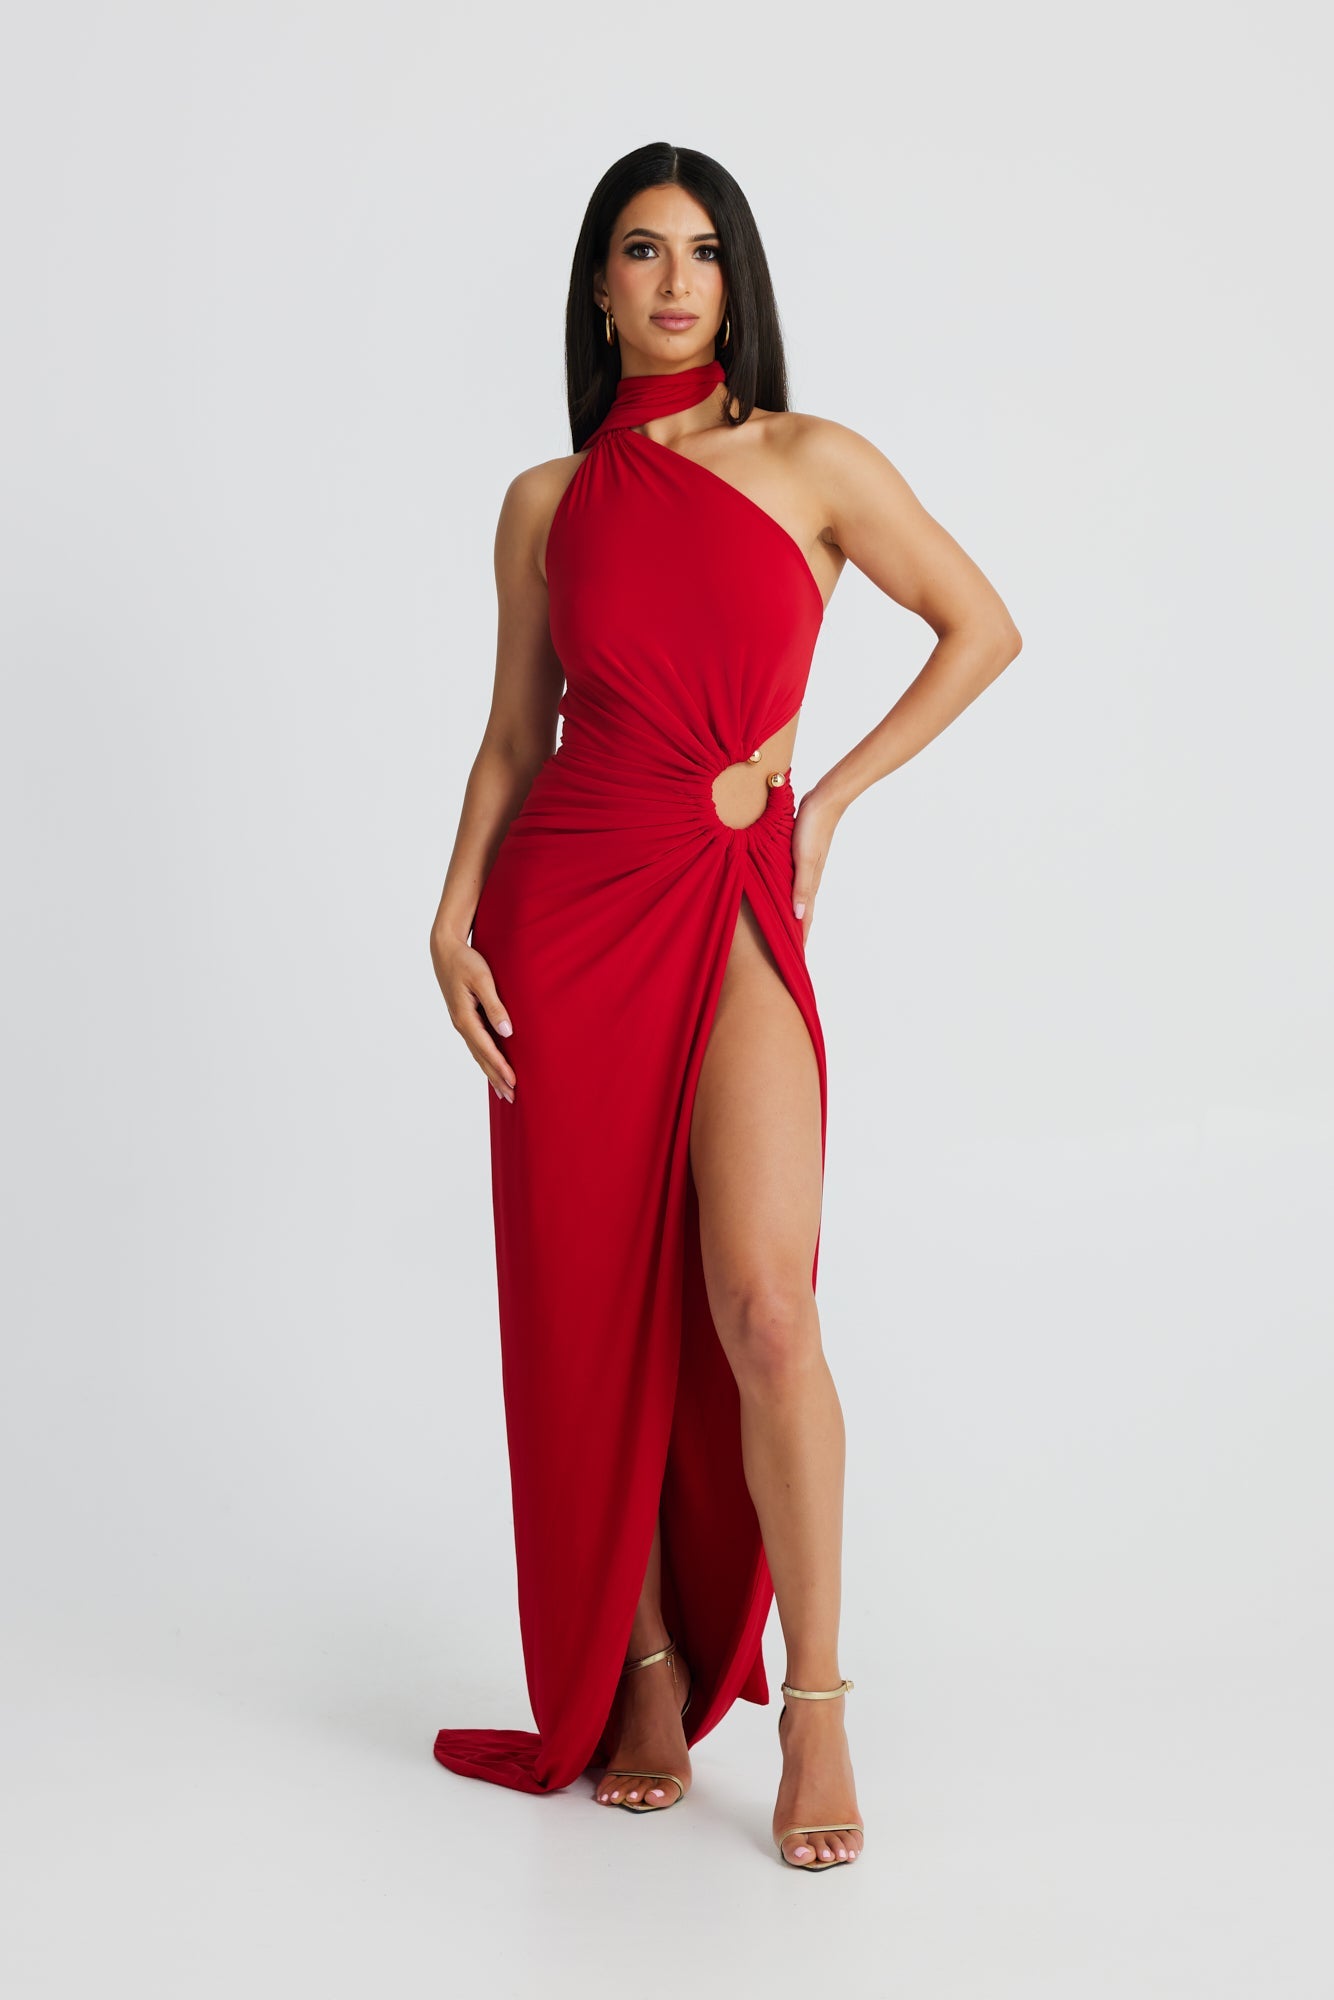 MÉLANI The Label BIANKA Red Cut Out Leg Split Form Fitted Dress